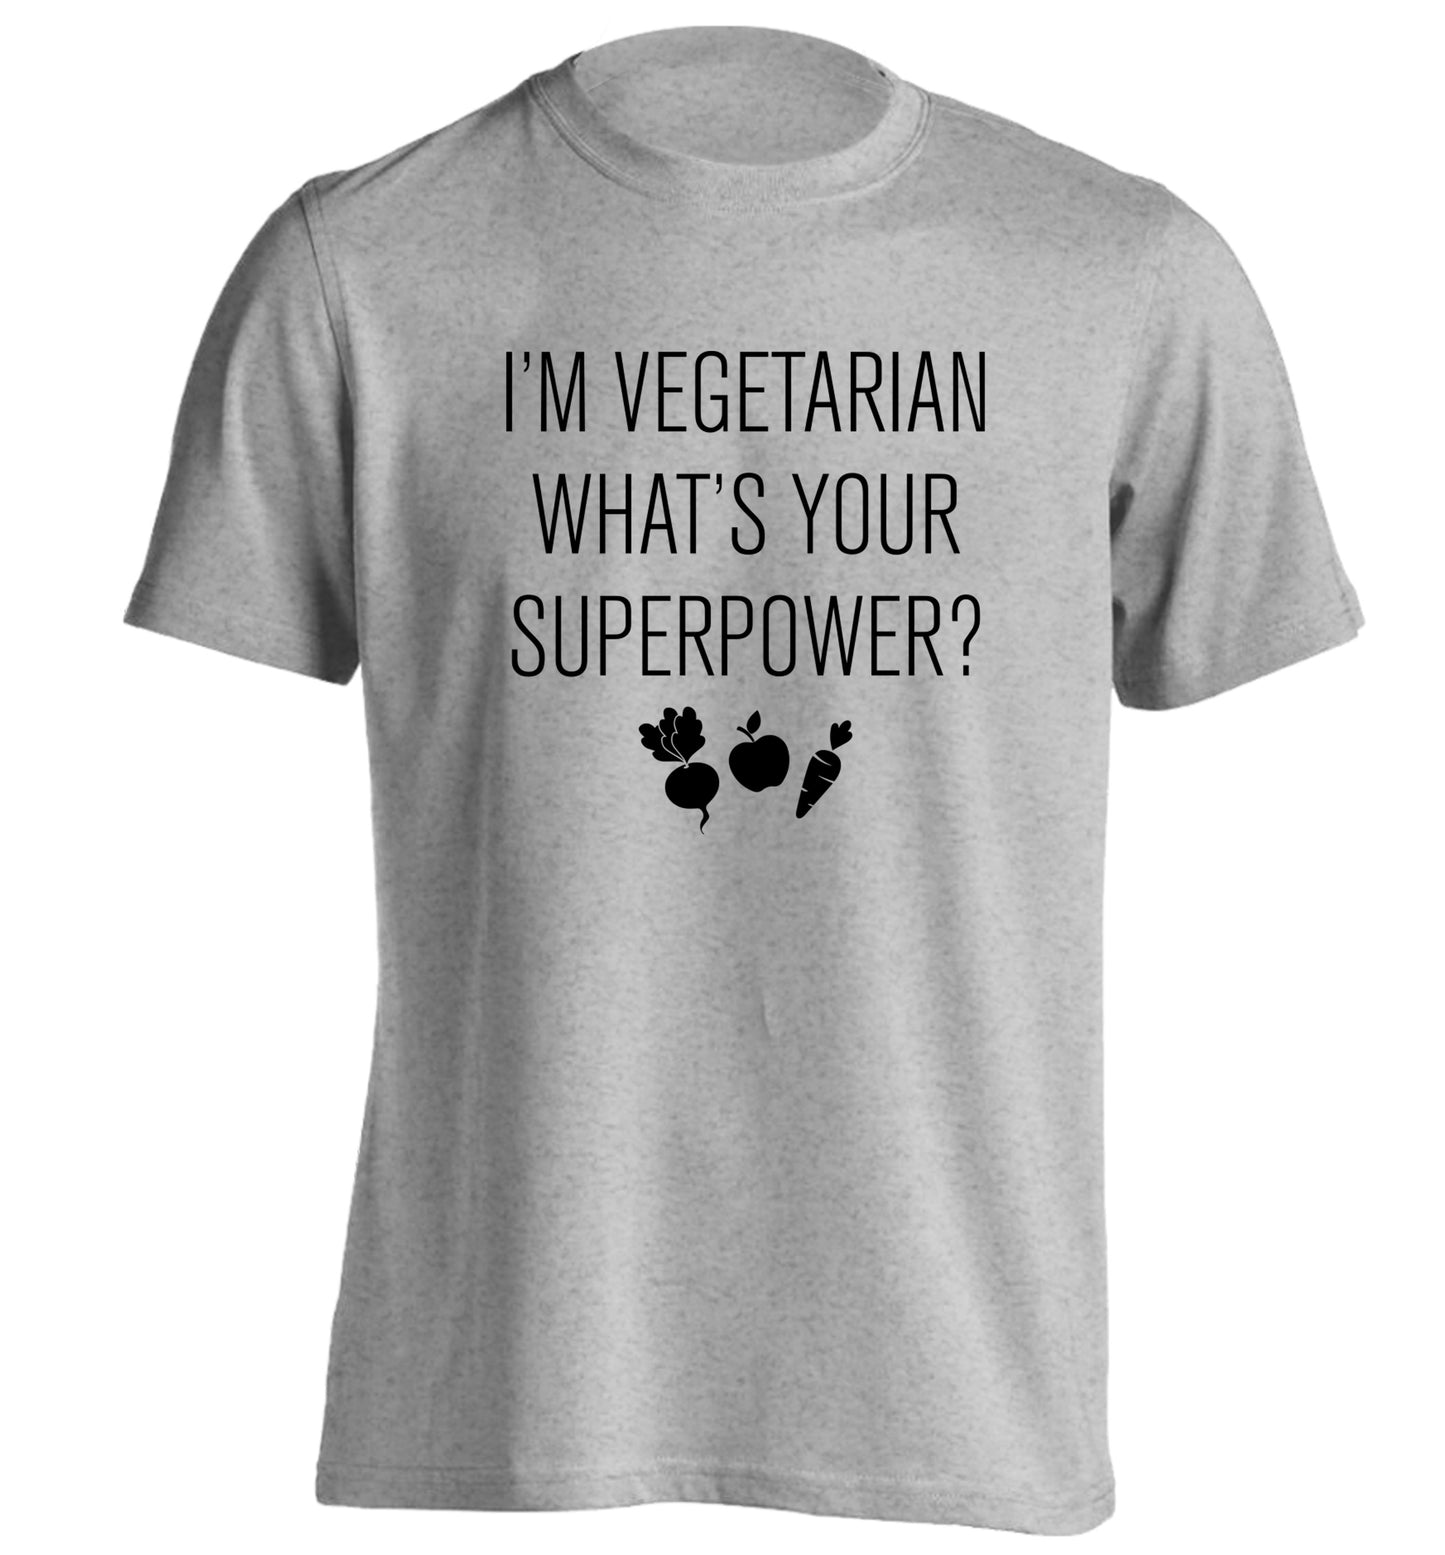 I'm vegetarian what's your superpower? adults unisex grey Tshirt 2XL